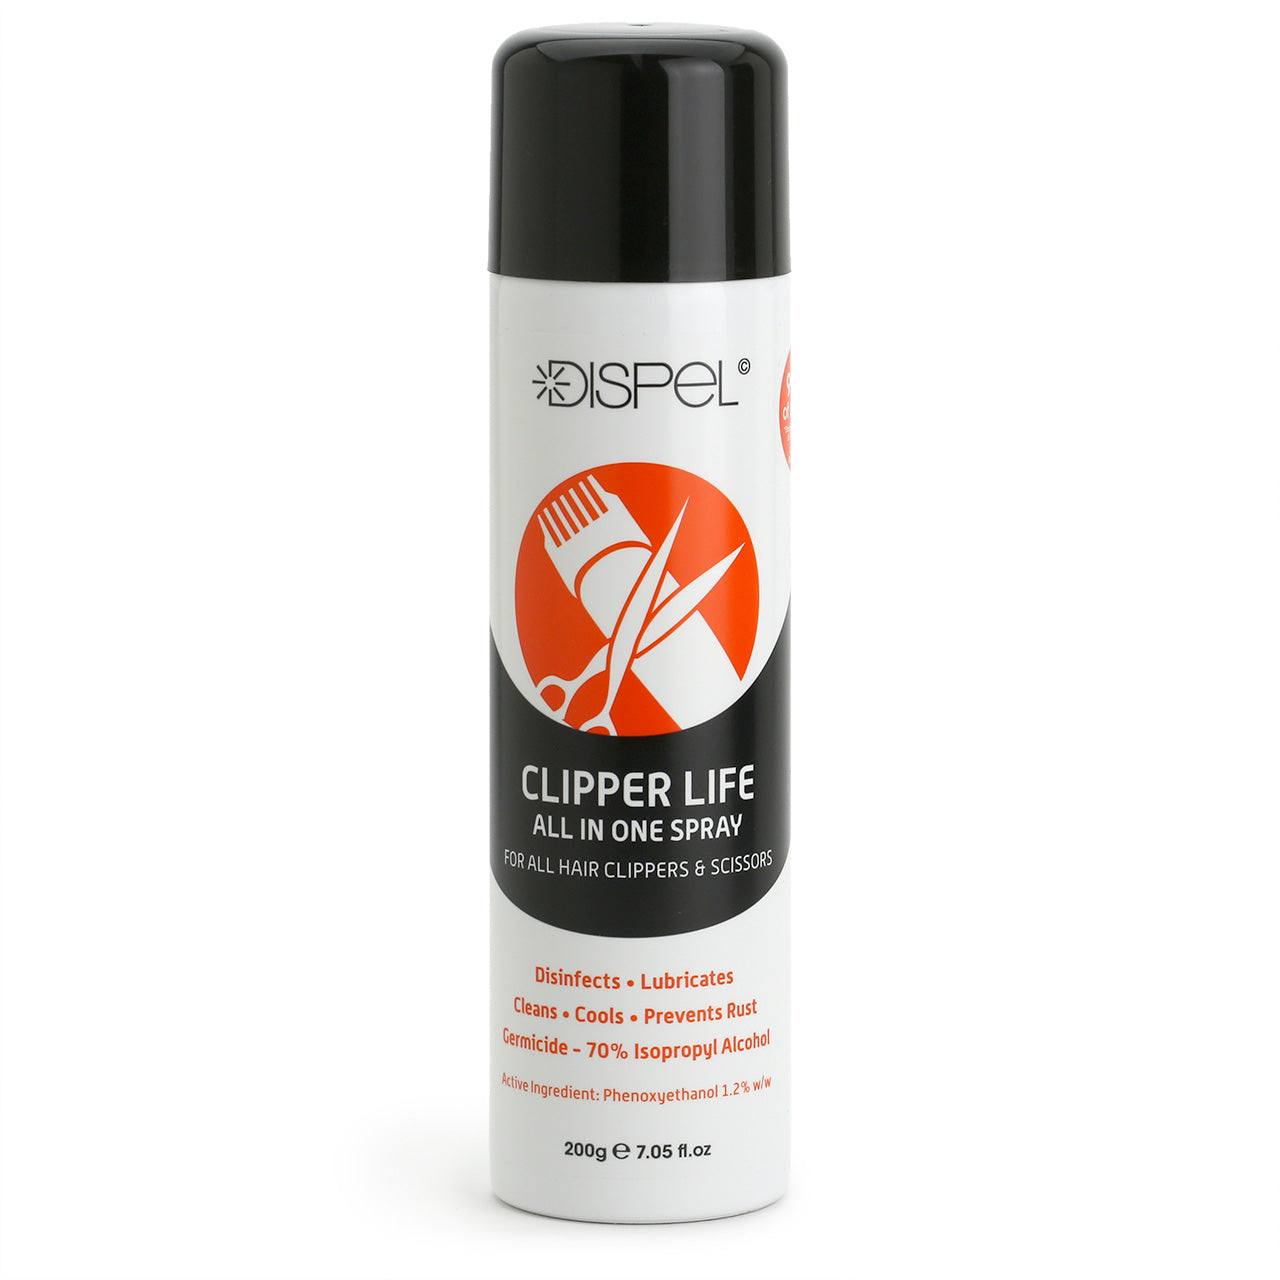 Dispel Clipper Life All In One Spray - White metal aerosol tin with black lid